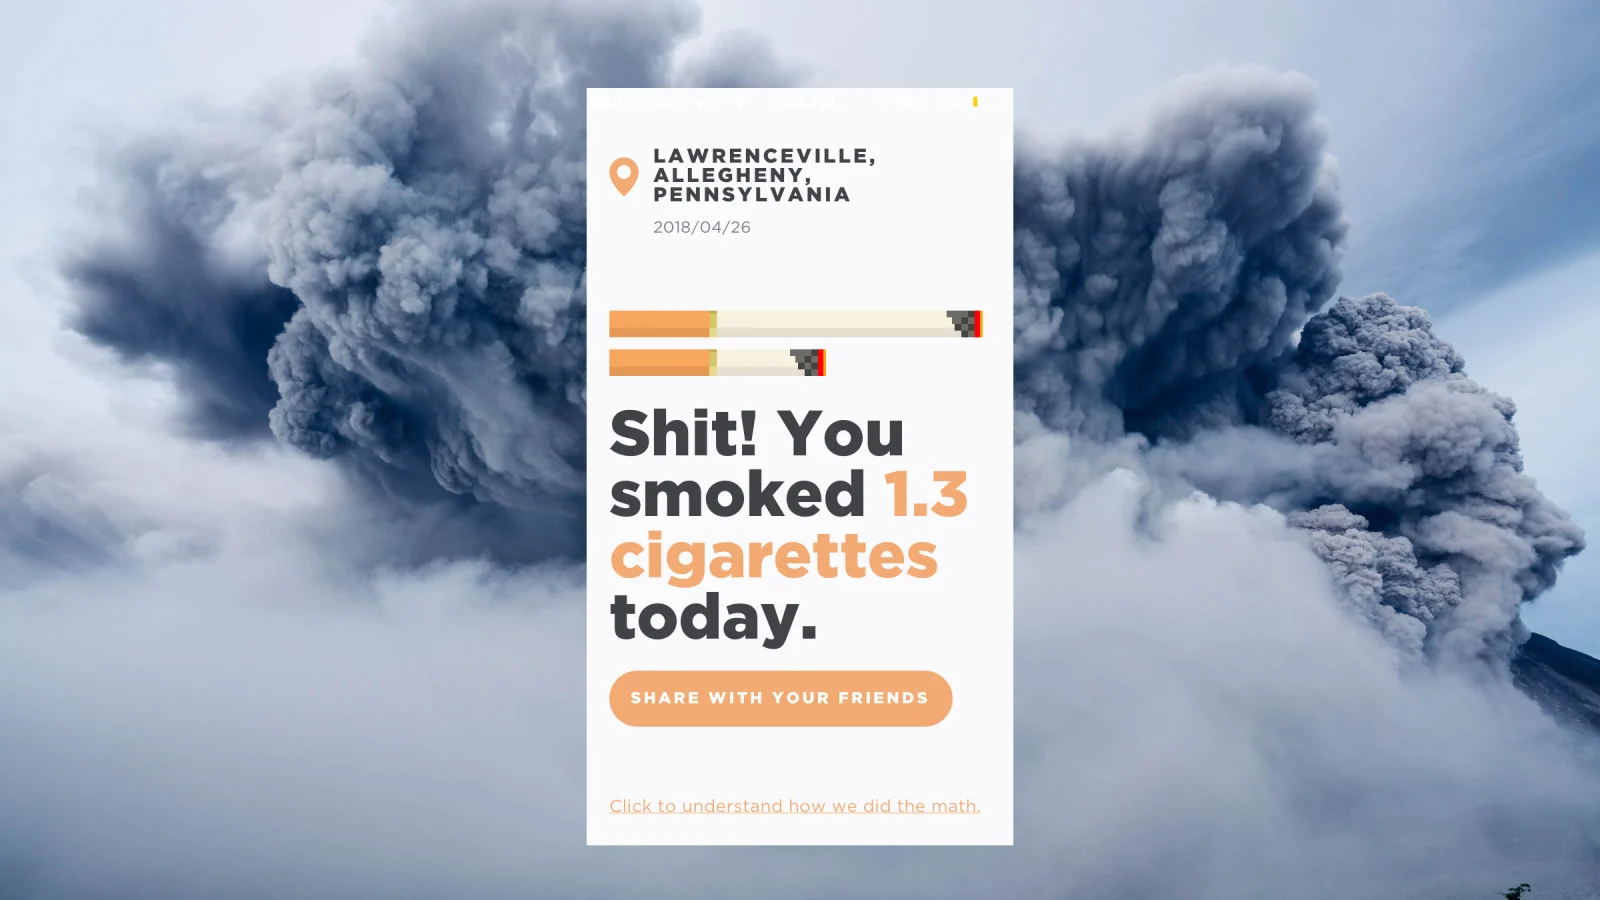 See Your City's Air Pollution Measured in Daily Cigarettes